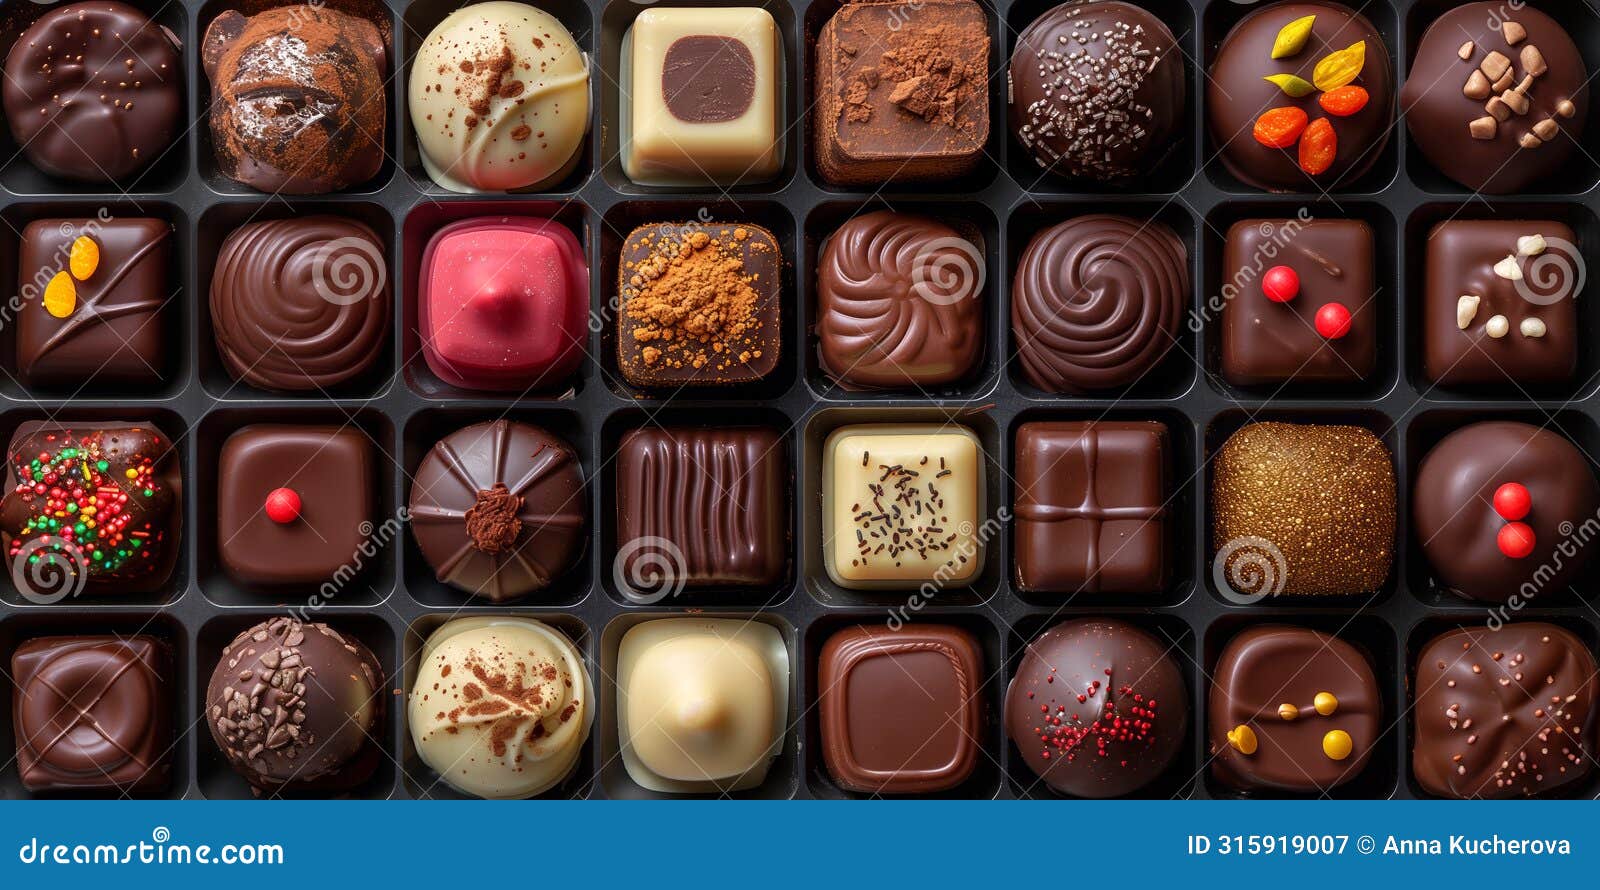 wide assortment of chocolates with various toppings in a large box